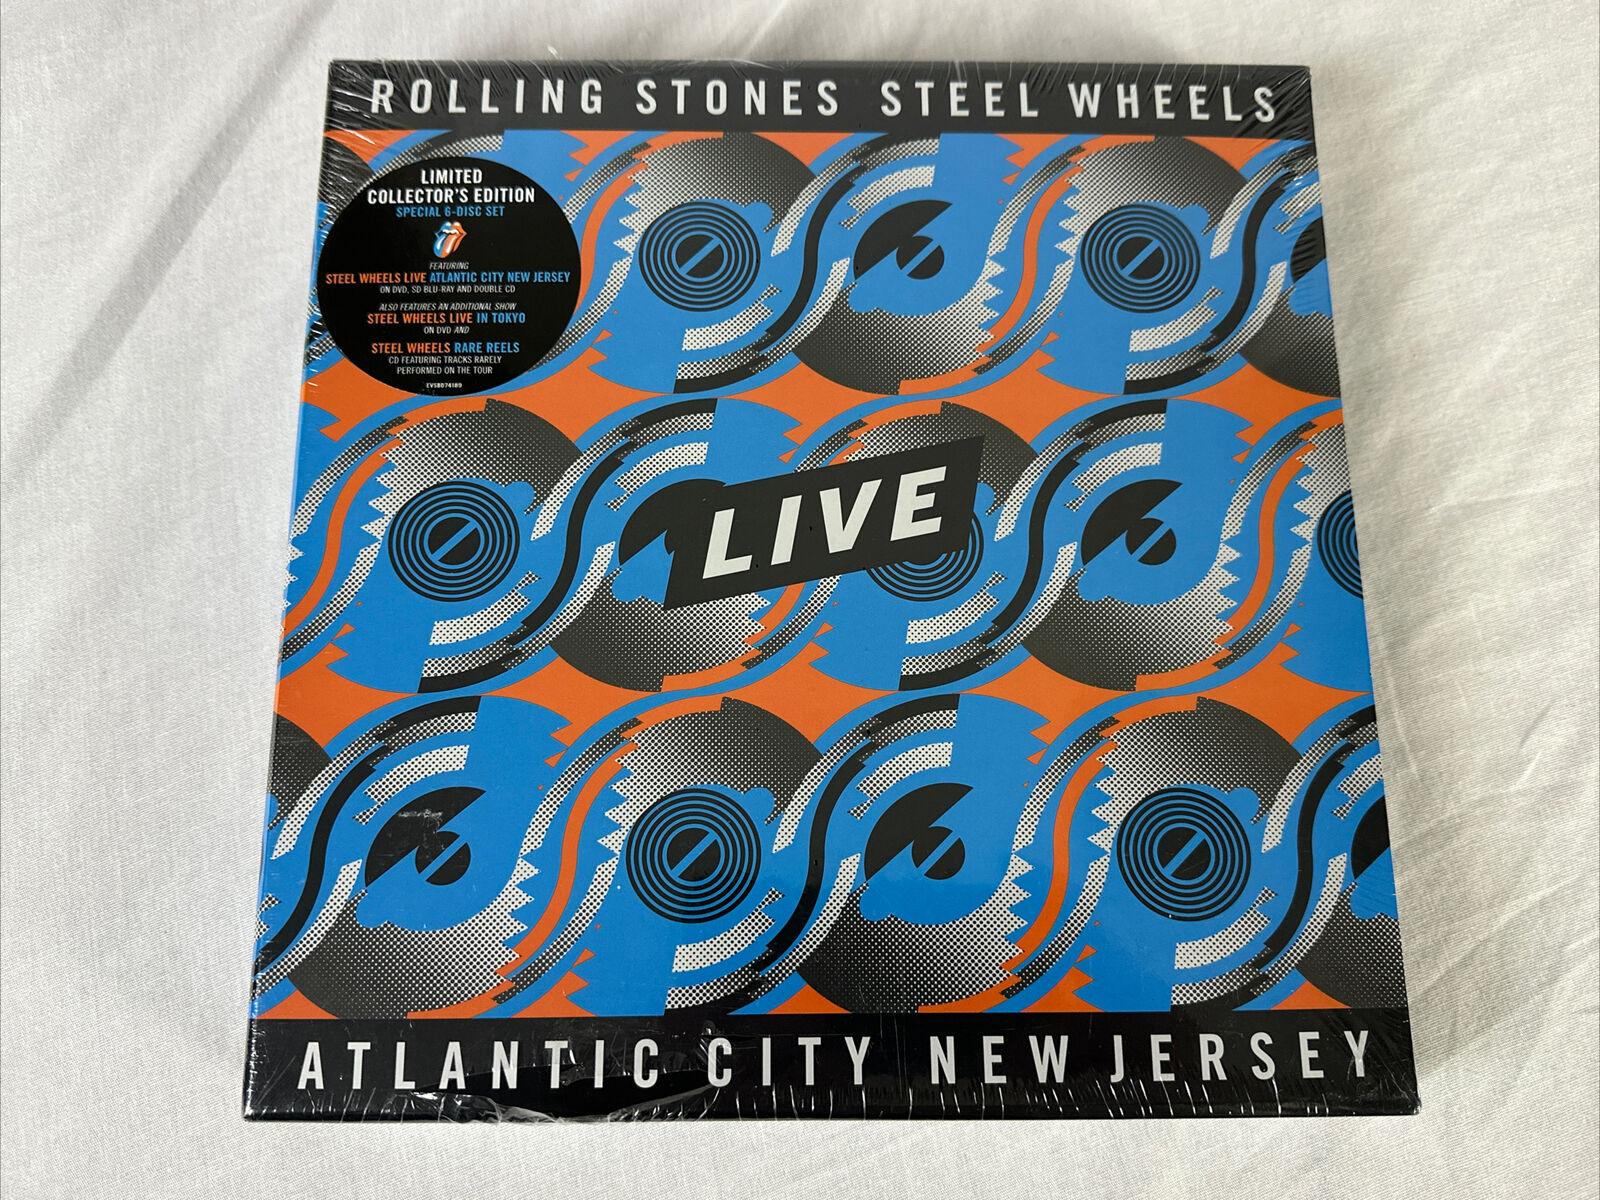 Steel Wheels Live (From Atlantic City) by The Rolling Stones (3 CD Set, 2 DVD )